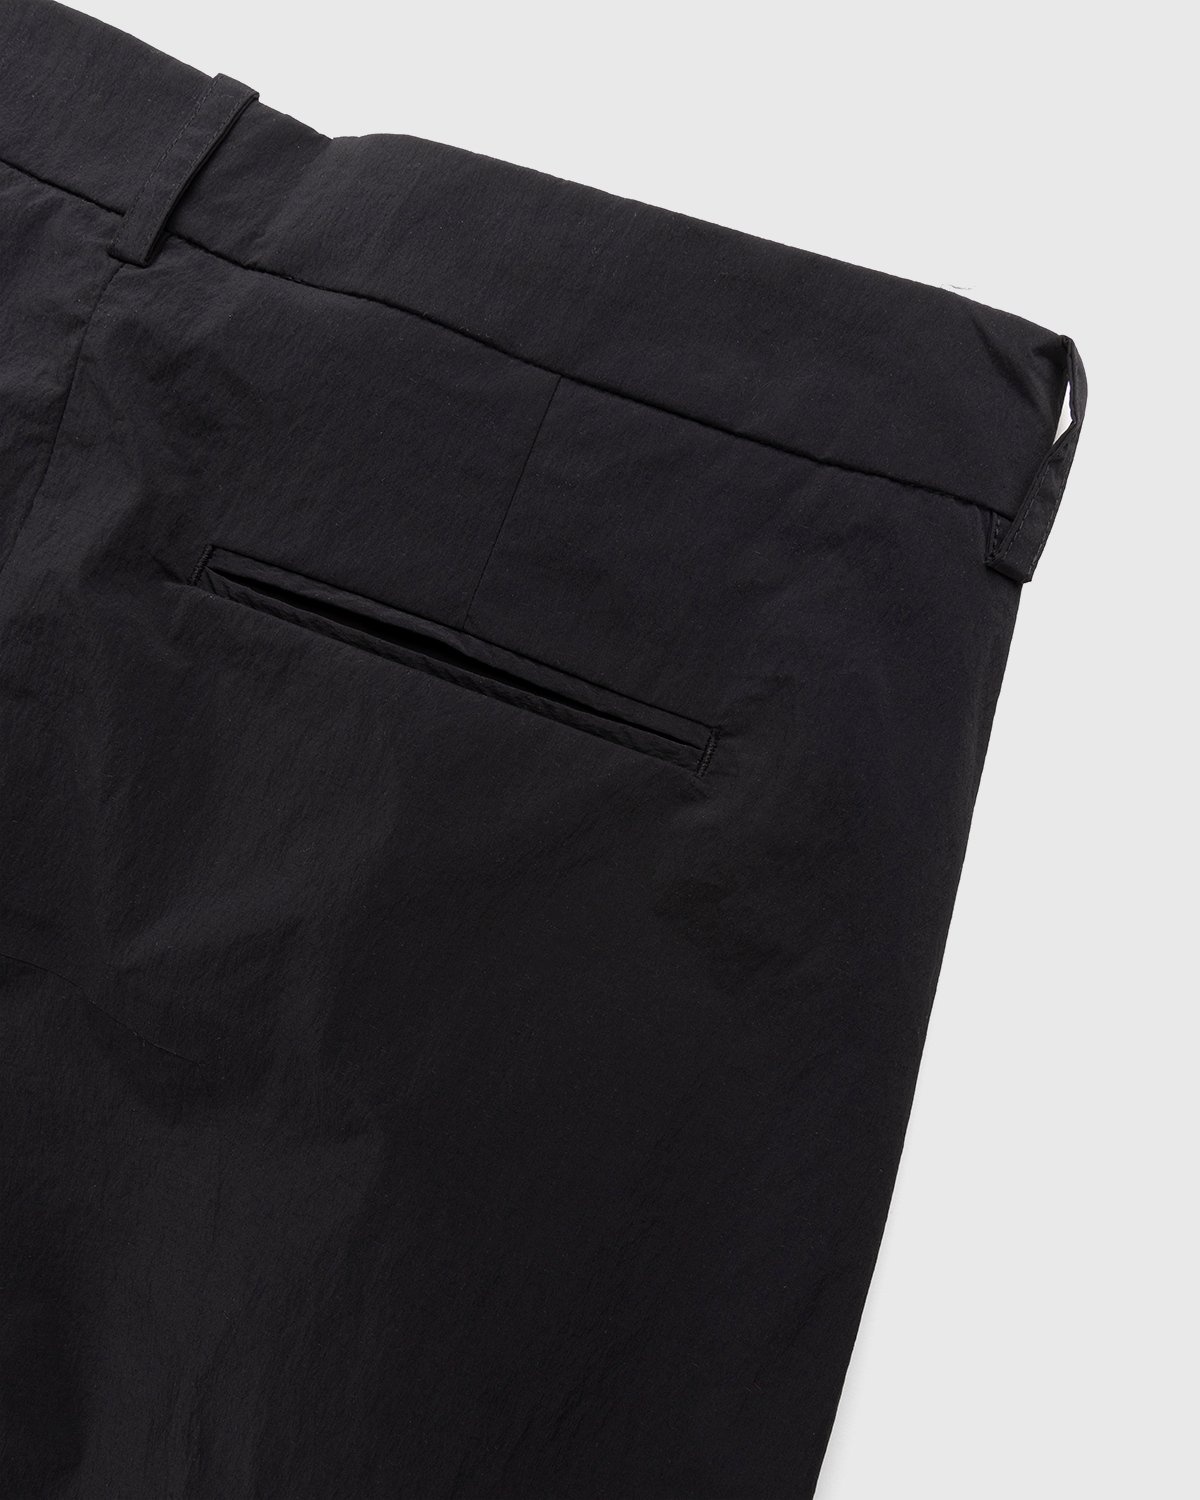 A-Cold-Wall* – Stealth Nylon Pant Black - Trousers - Black - Image 3